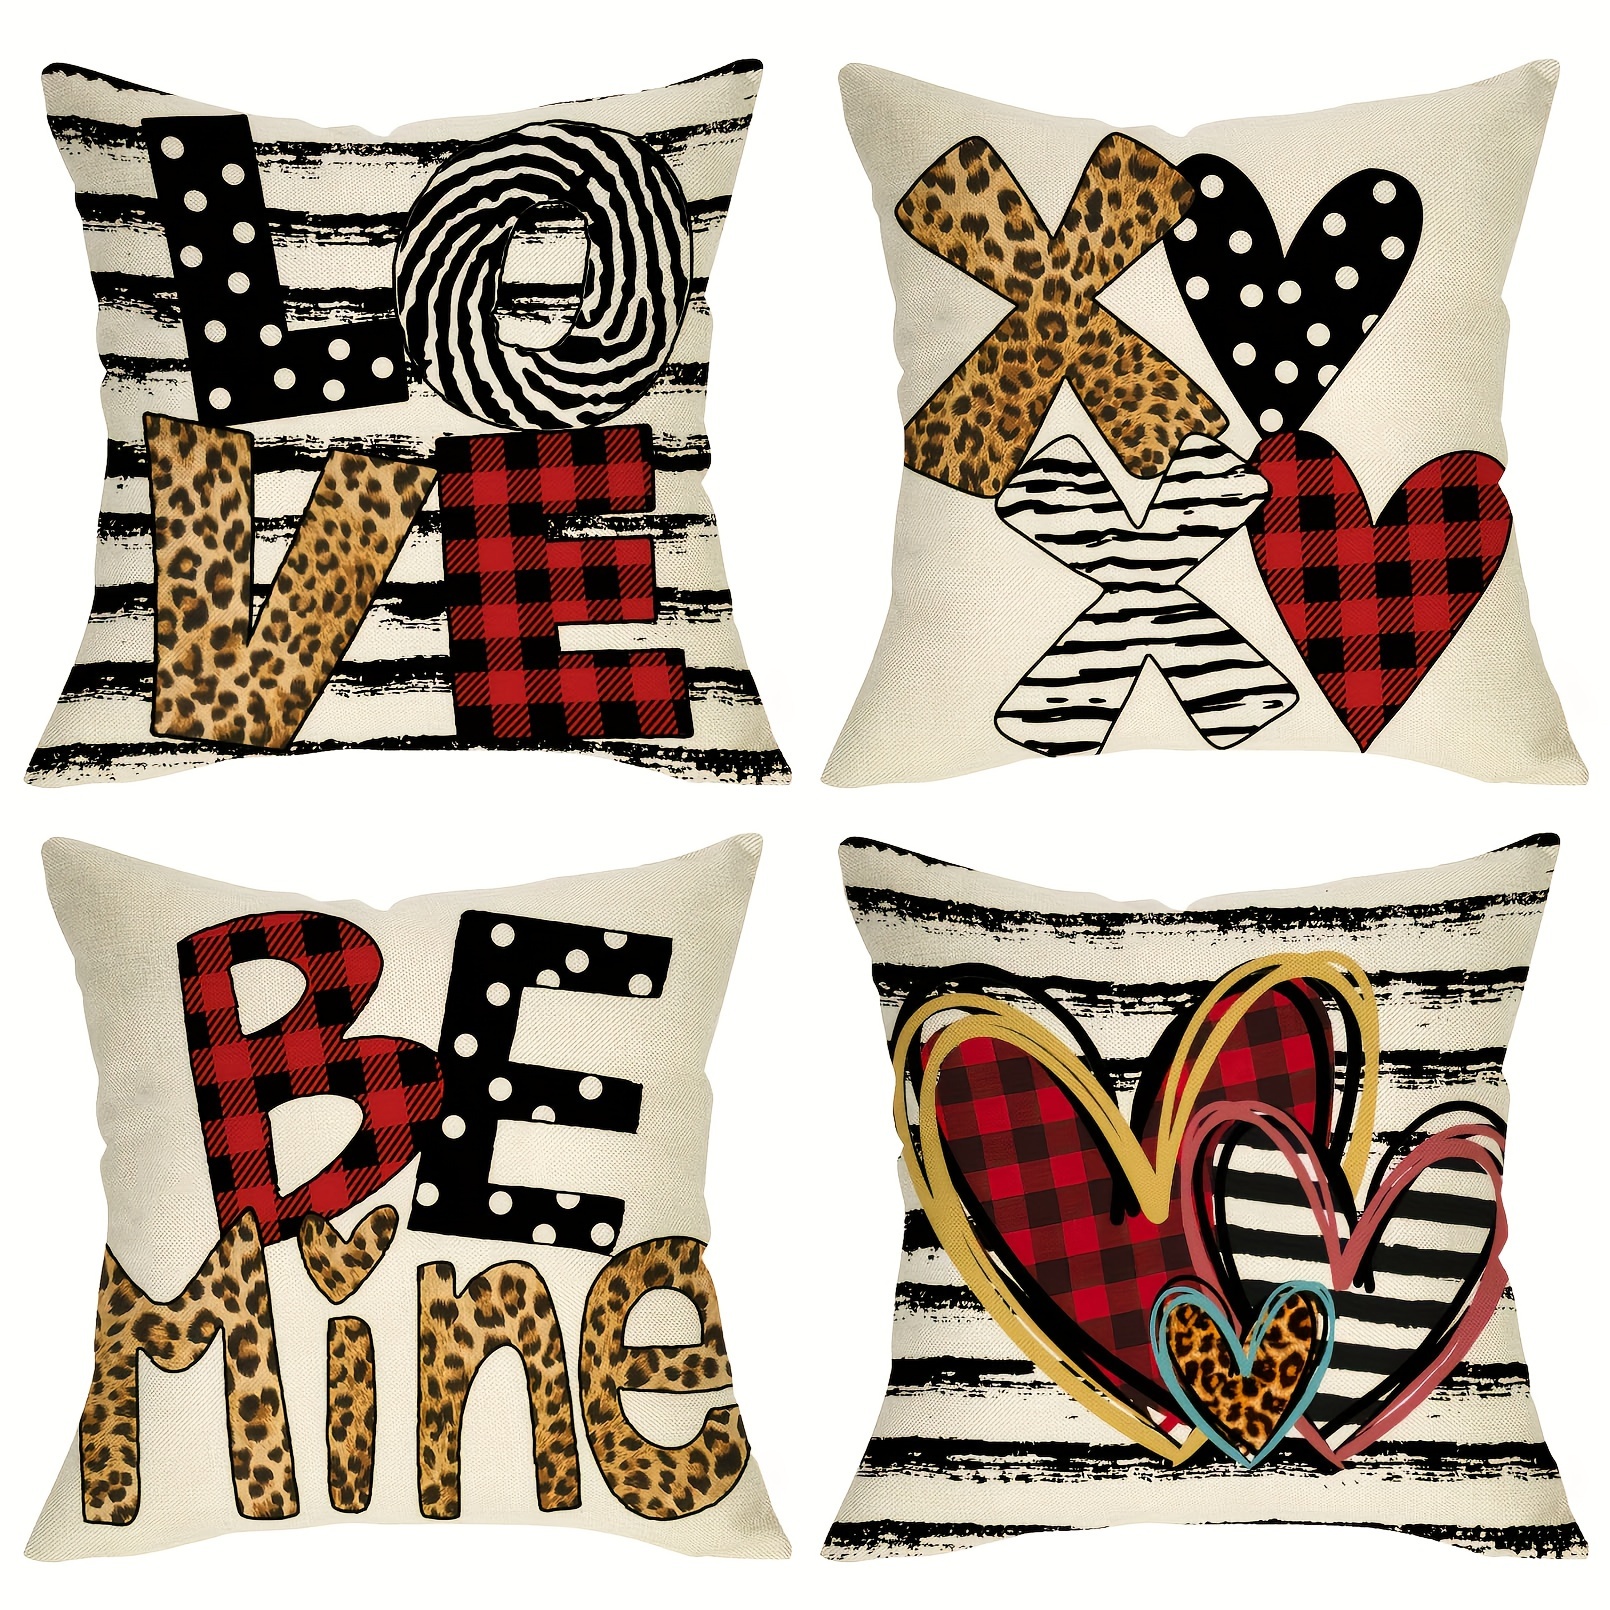 

4pcs Valentine's Day Decorative Throw Pillow Cover 18x18, Be Mine Love Leopard Red Buffalo Plaid Check Black Polka Dot Striped Anniversary Wedding Home Decor Farmhouse Cushion Case For Couch